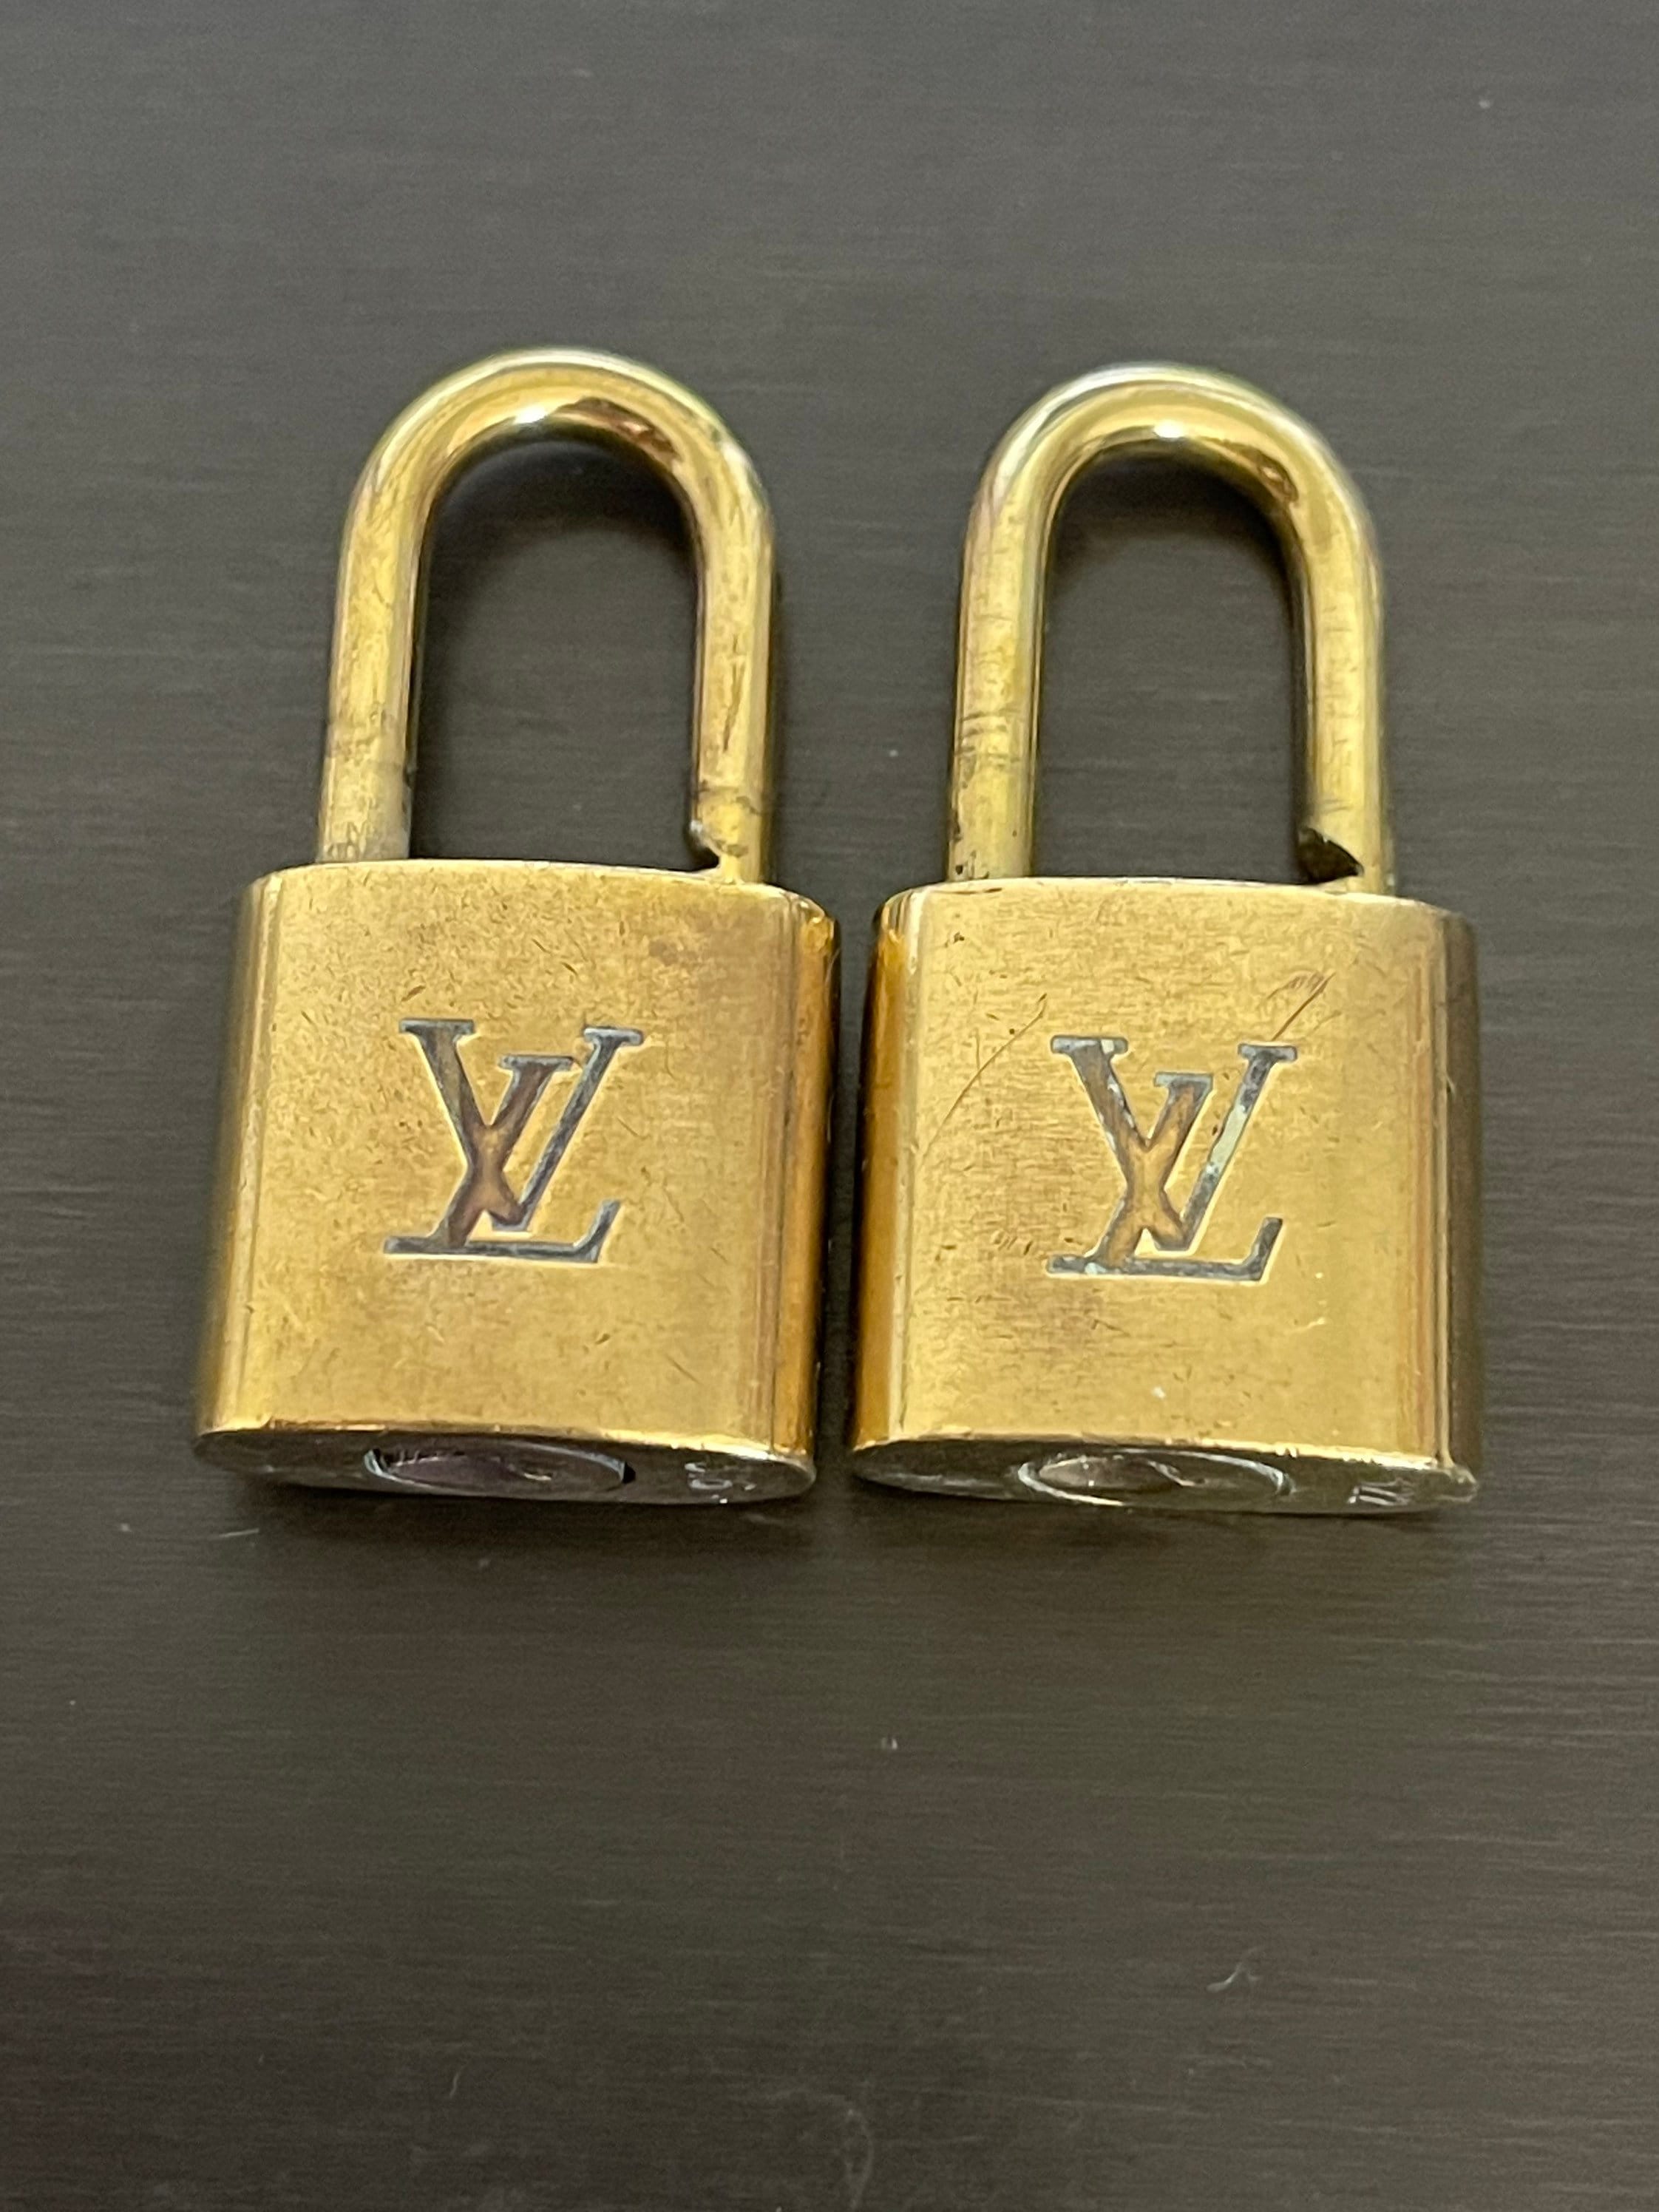 LOUIS VUITTON Authentic Brass Padlock with Matching Key (LV Lock Number 322)